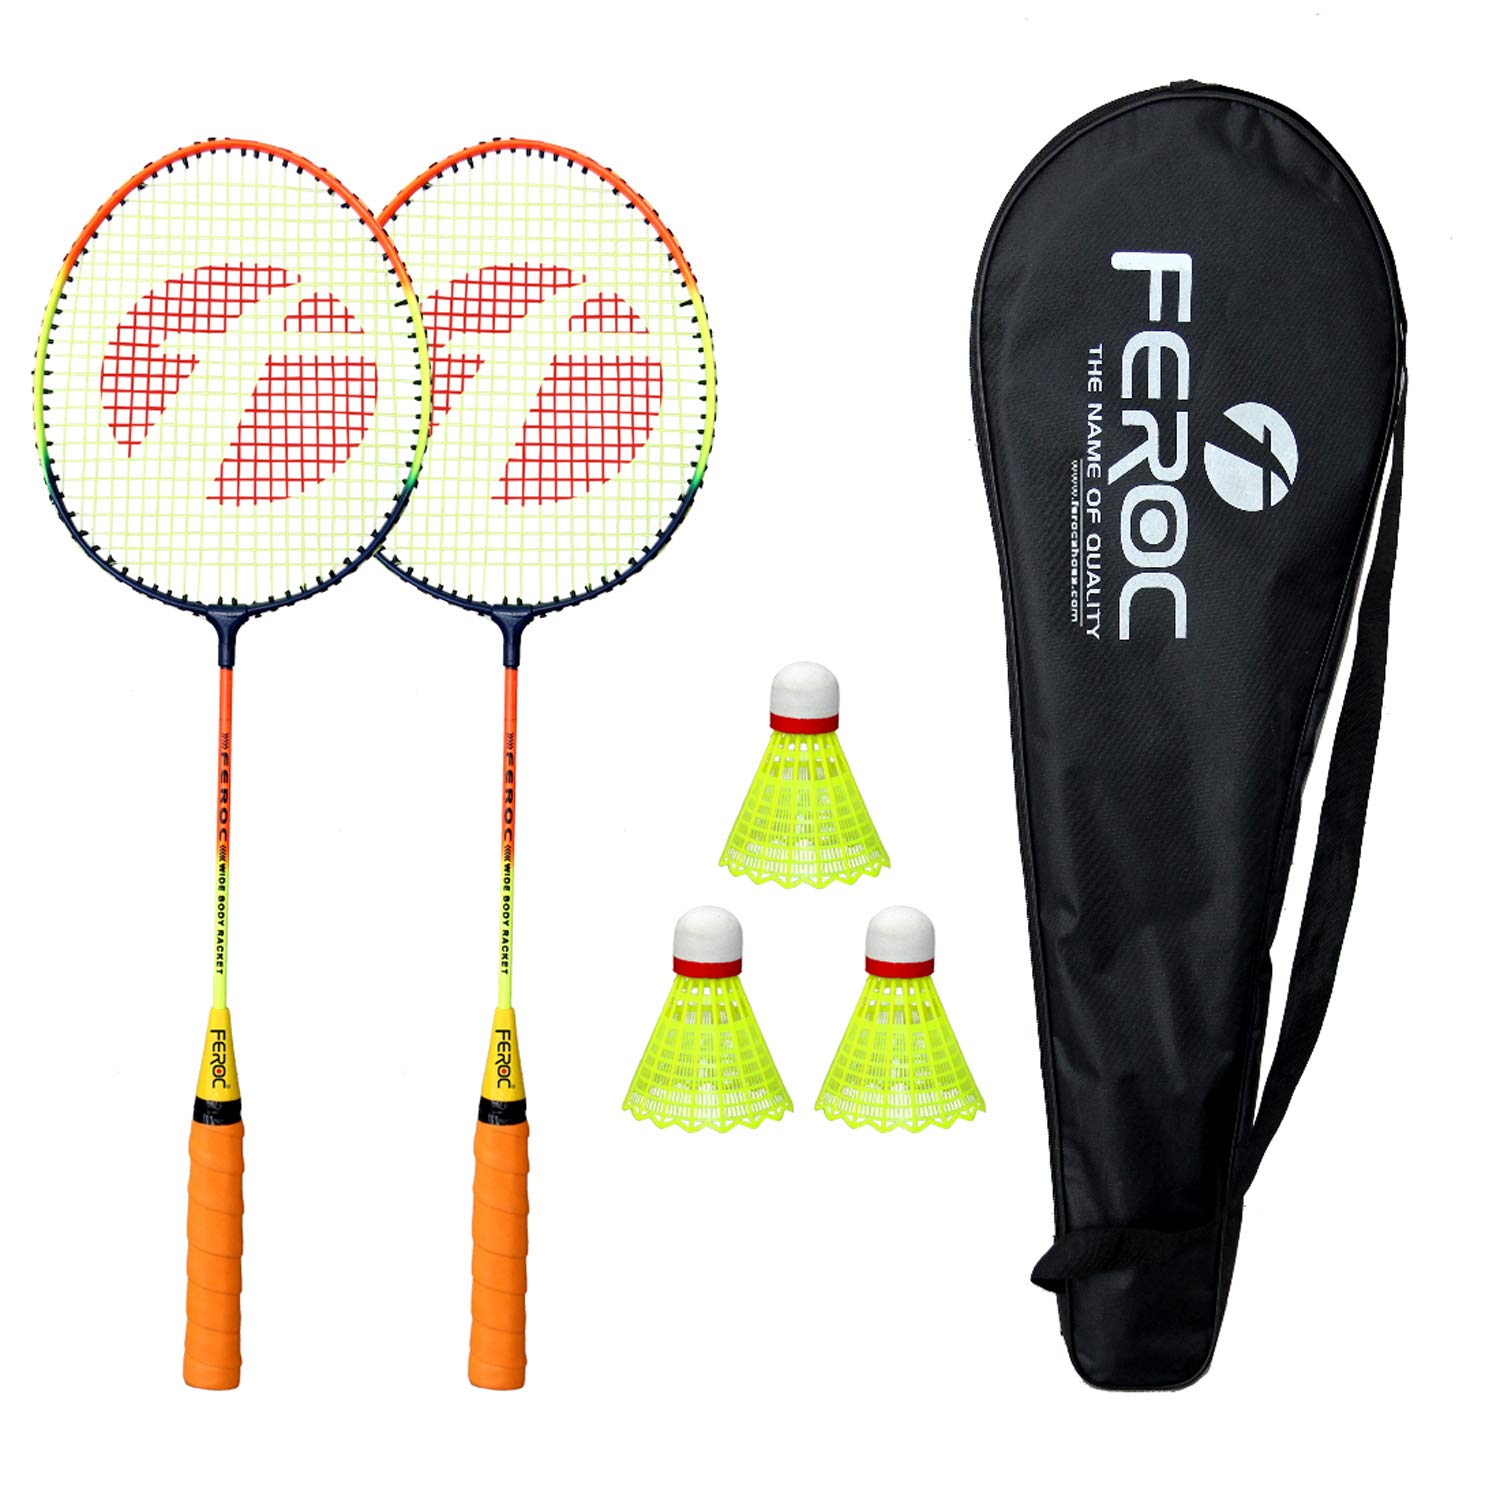 Feroc Badminton Racket Set of 2 with 3 Pieces Nylon shuttles with Full ...